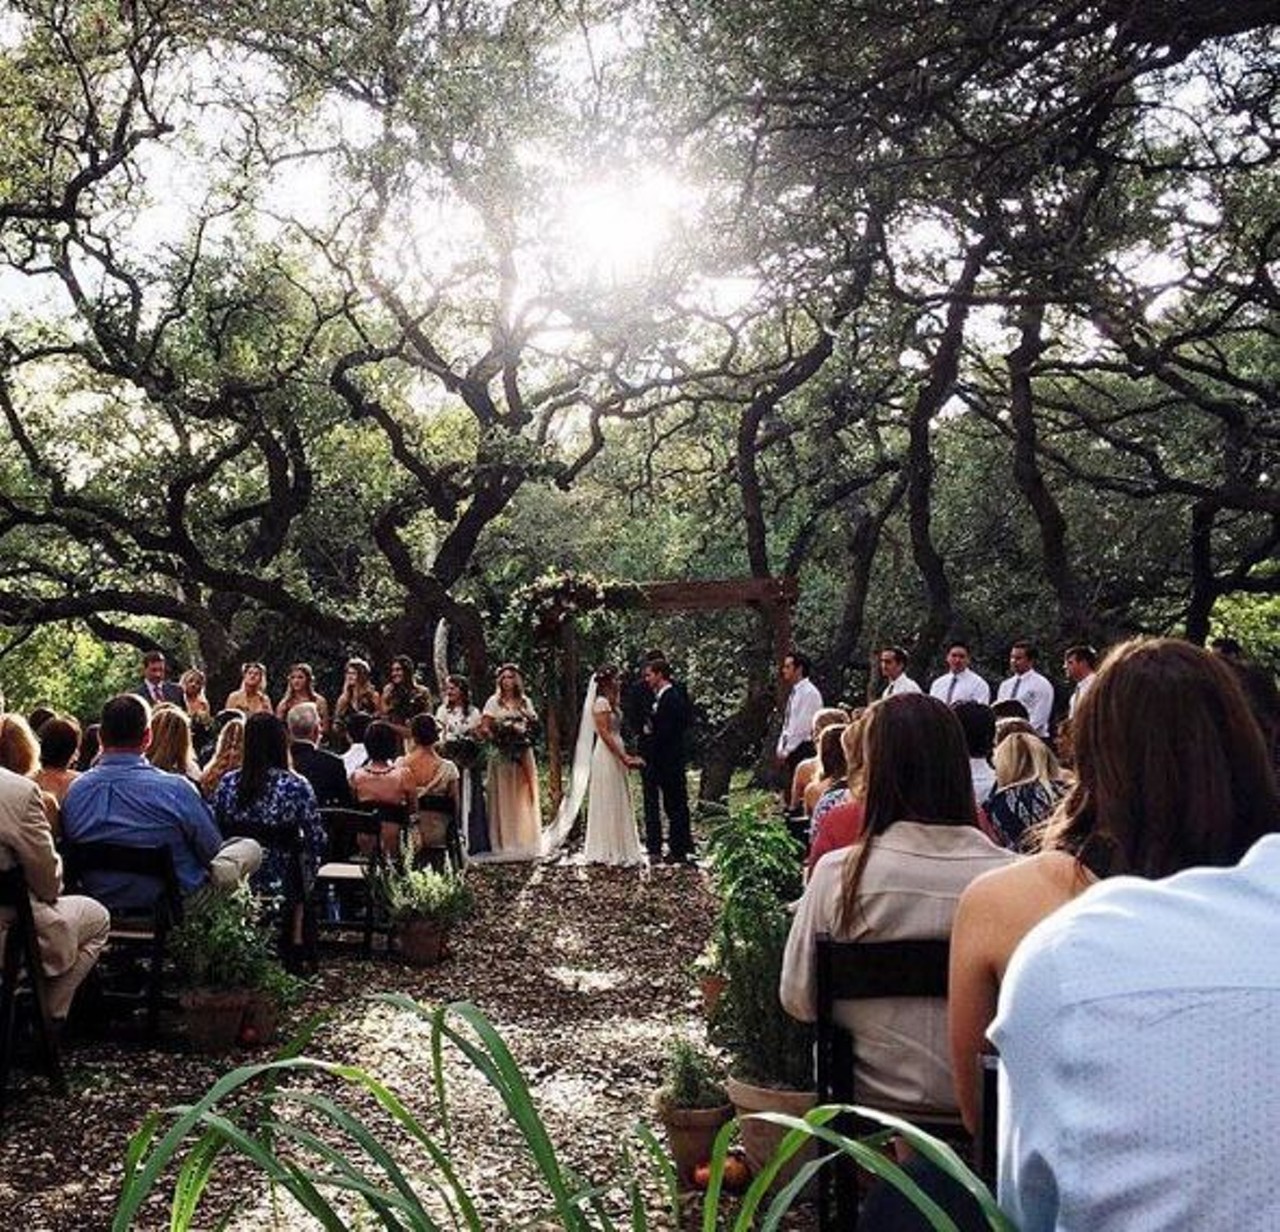 The Addison Grove
Throughout the 6,000 square foot venue you&#146;ll find chandeliers, Texas wildflowers, Longhorns, oak trees, and a view of a pond, giving you the perfect balance of city and country.
11903 Fitzhugh Road, Austin, theaddisongrove.com
Photo via Instagram, theaddisongrove